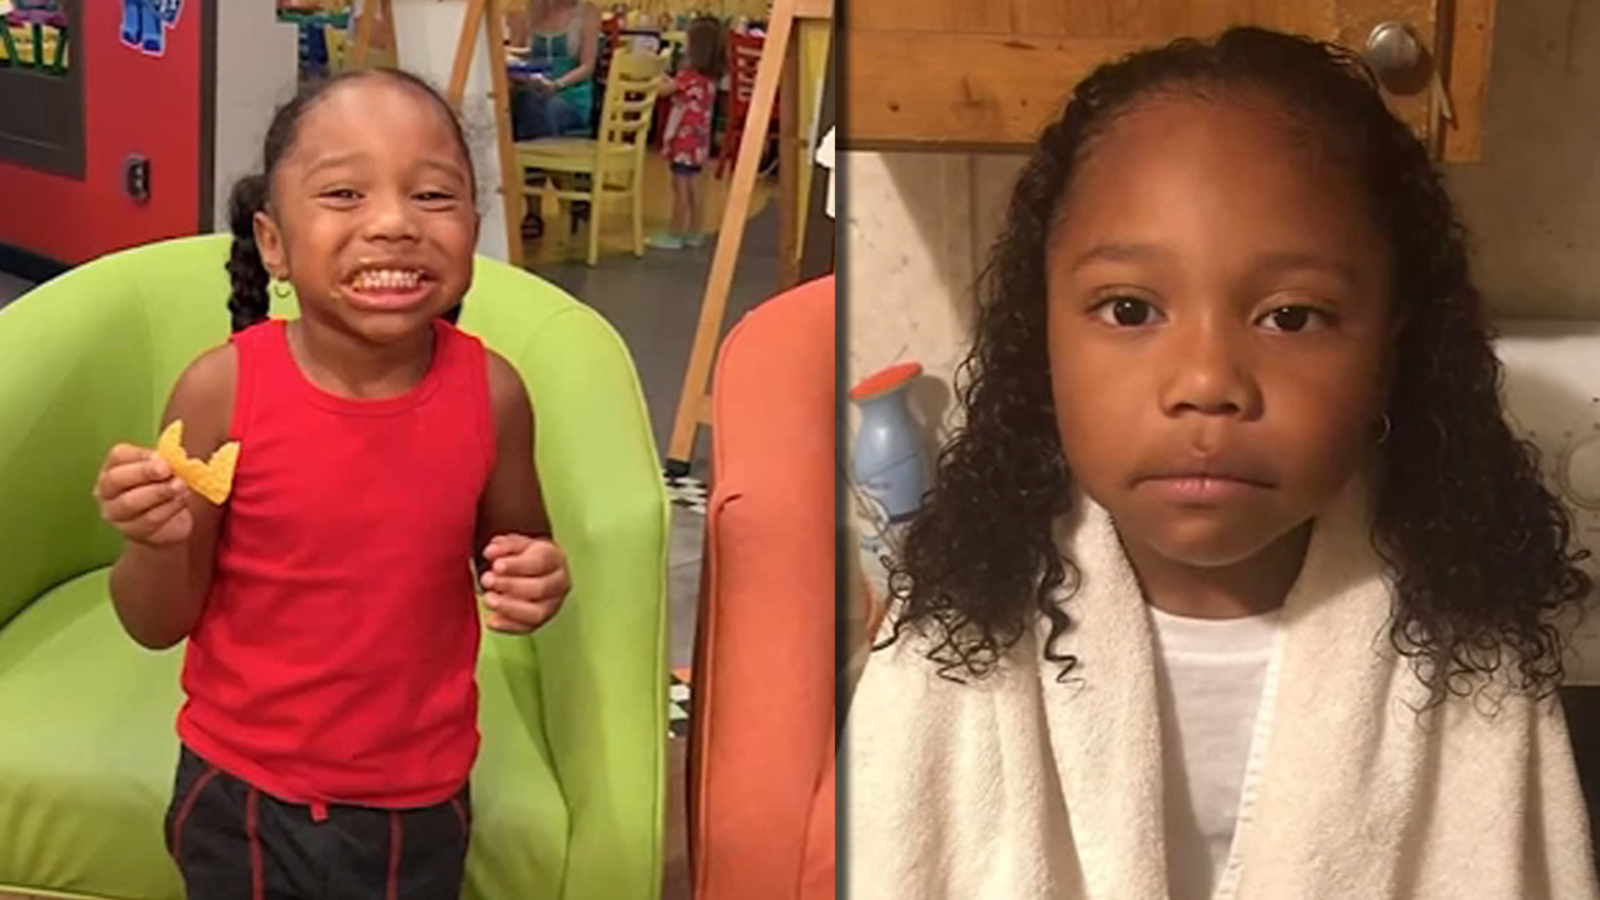 School Superintendent Says 4-Year Old Boy Must Cut His Hair or Wear A Dress  - Y'all Know What